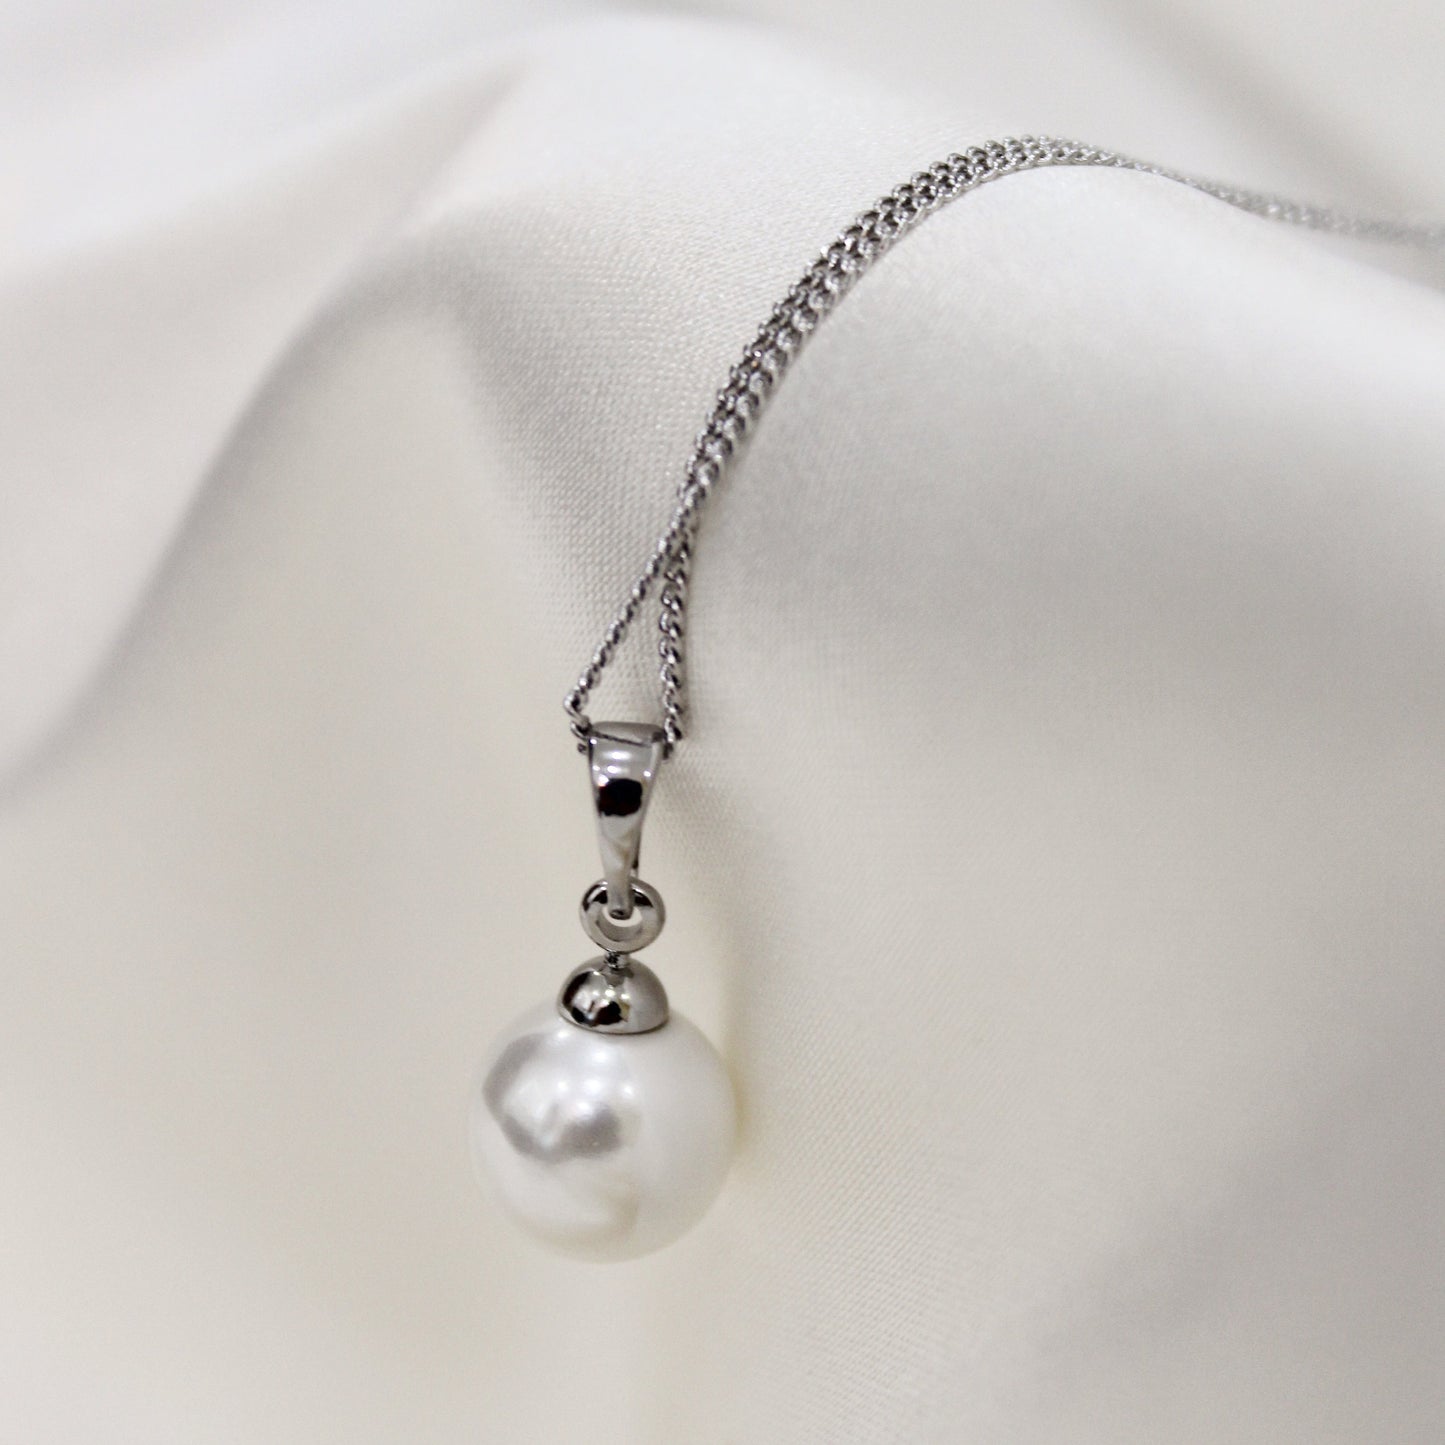 Silver chain with pearl